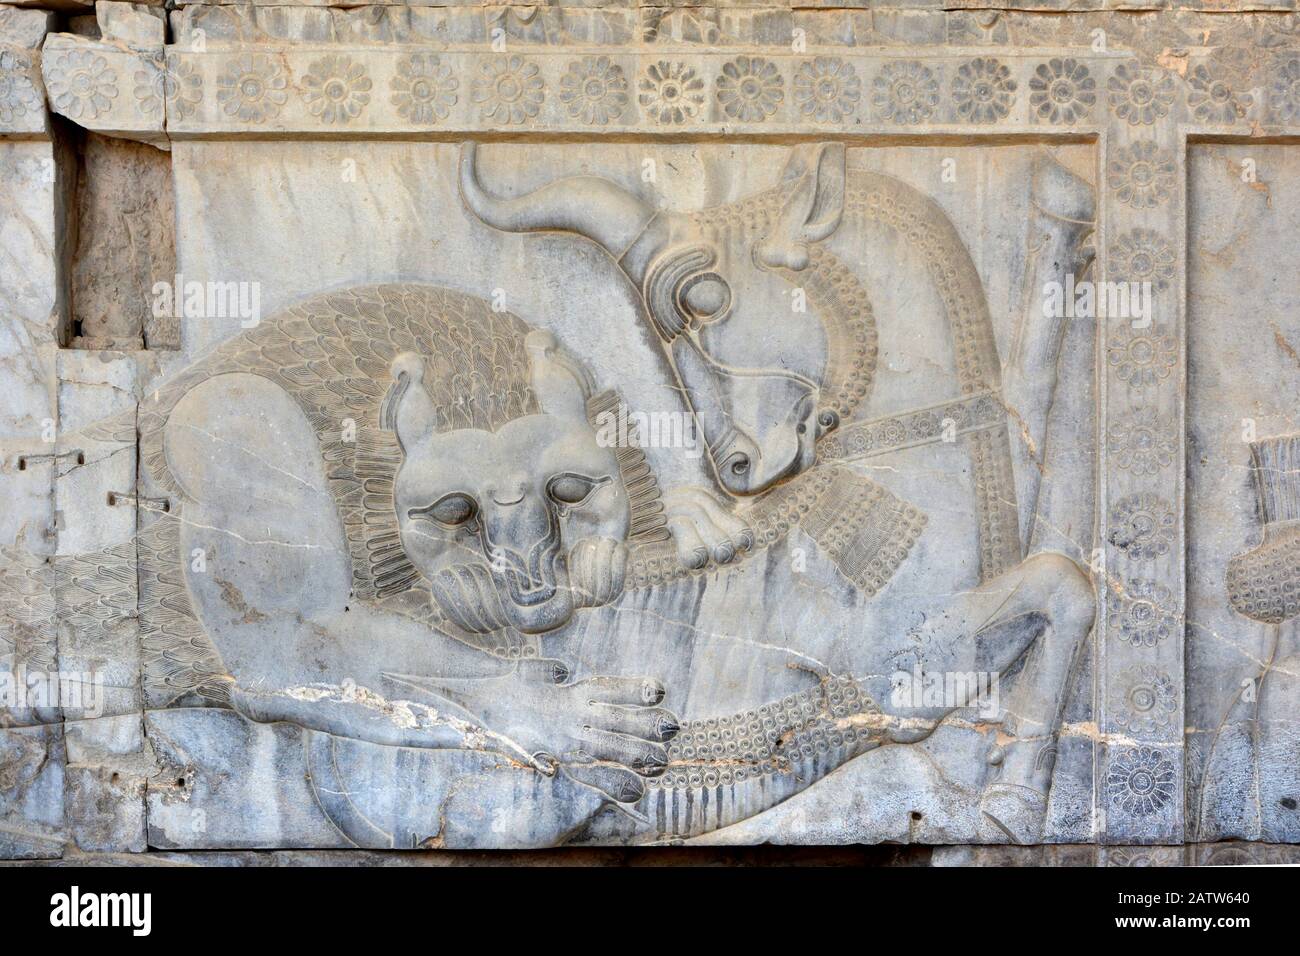 Apadana Palace, Persepolis. Lion and bull at the central facade  of the eastern stairway. Possibly an allegorical symbol for Nowruz. Stock Photo